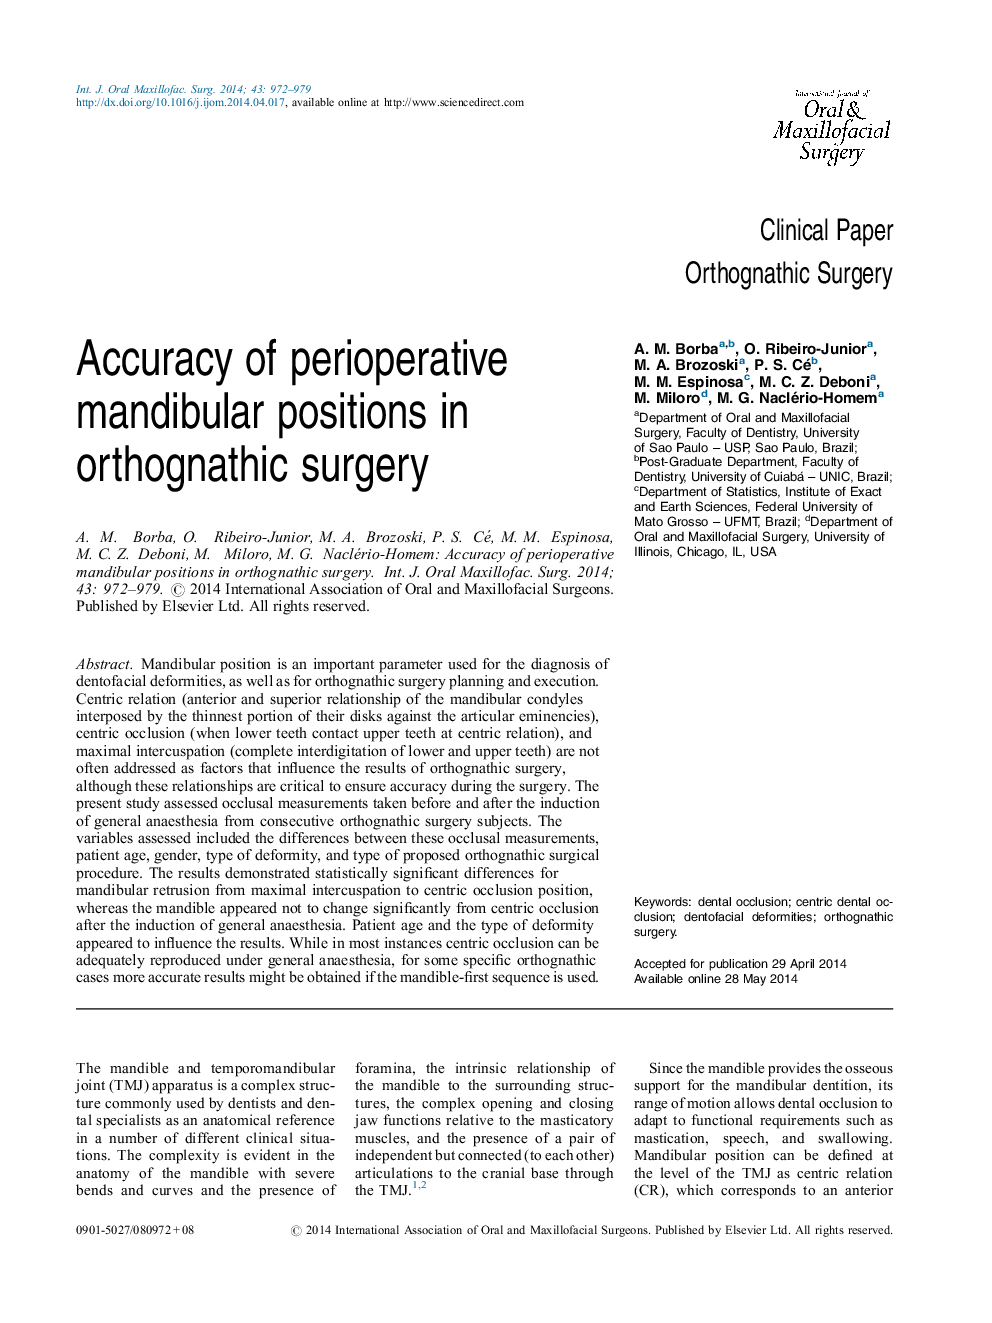 Accuracy of perioperative mandibular positions in orthognathic surgery